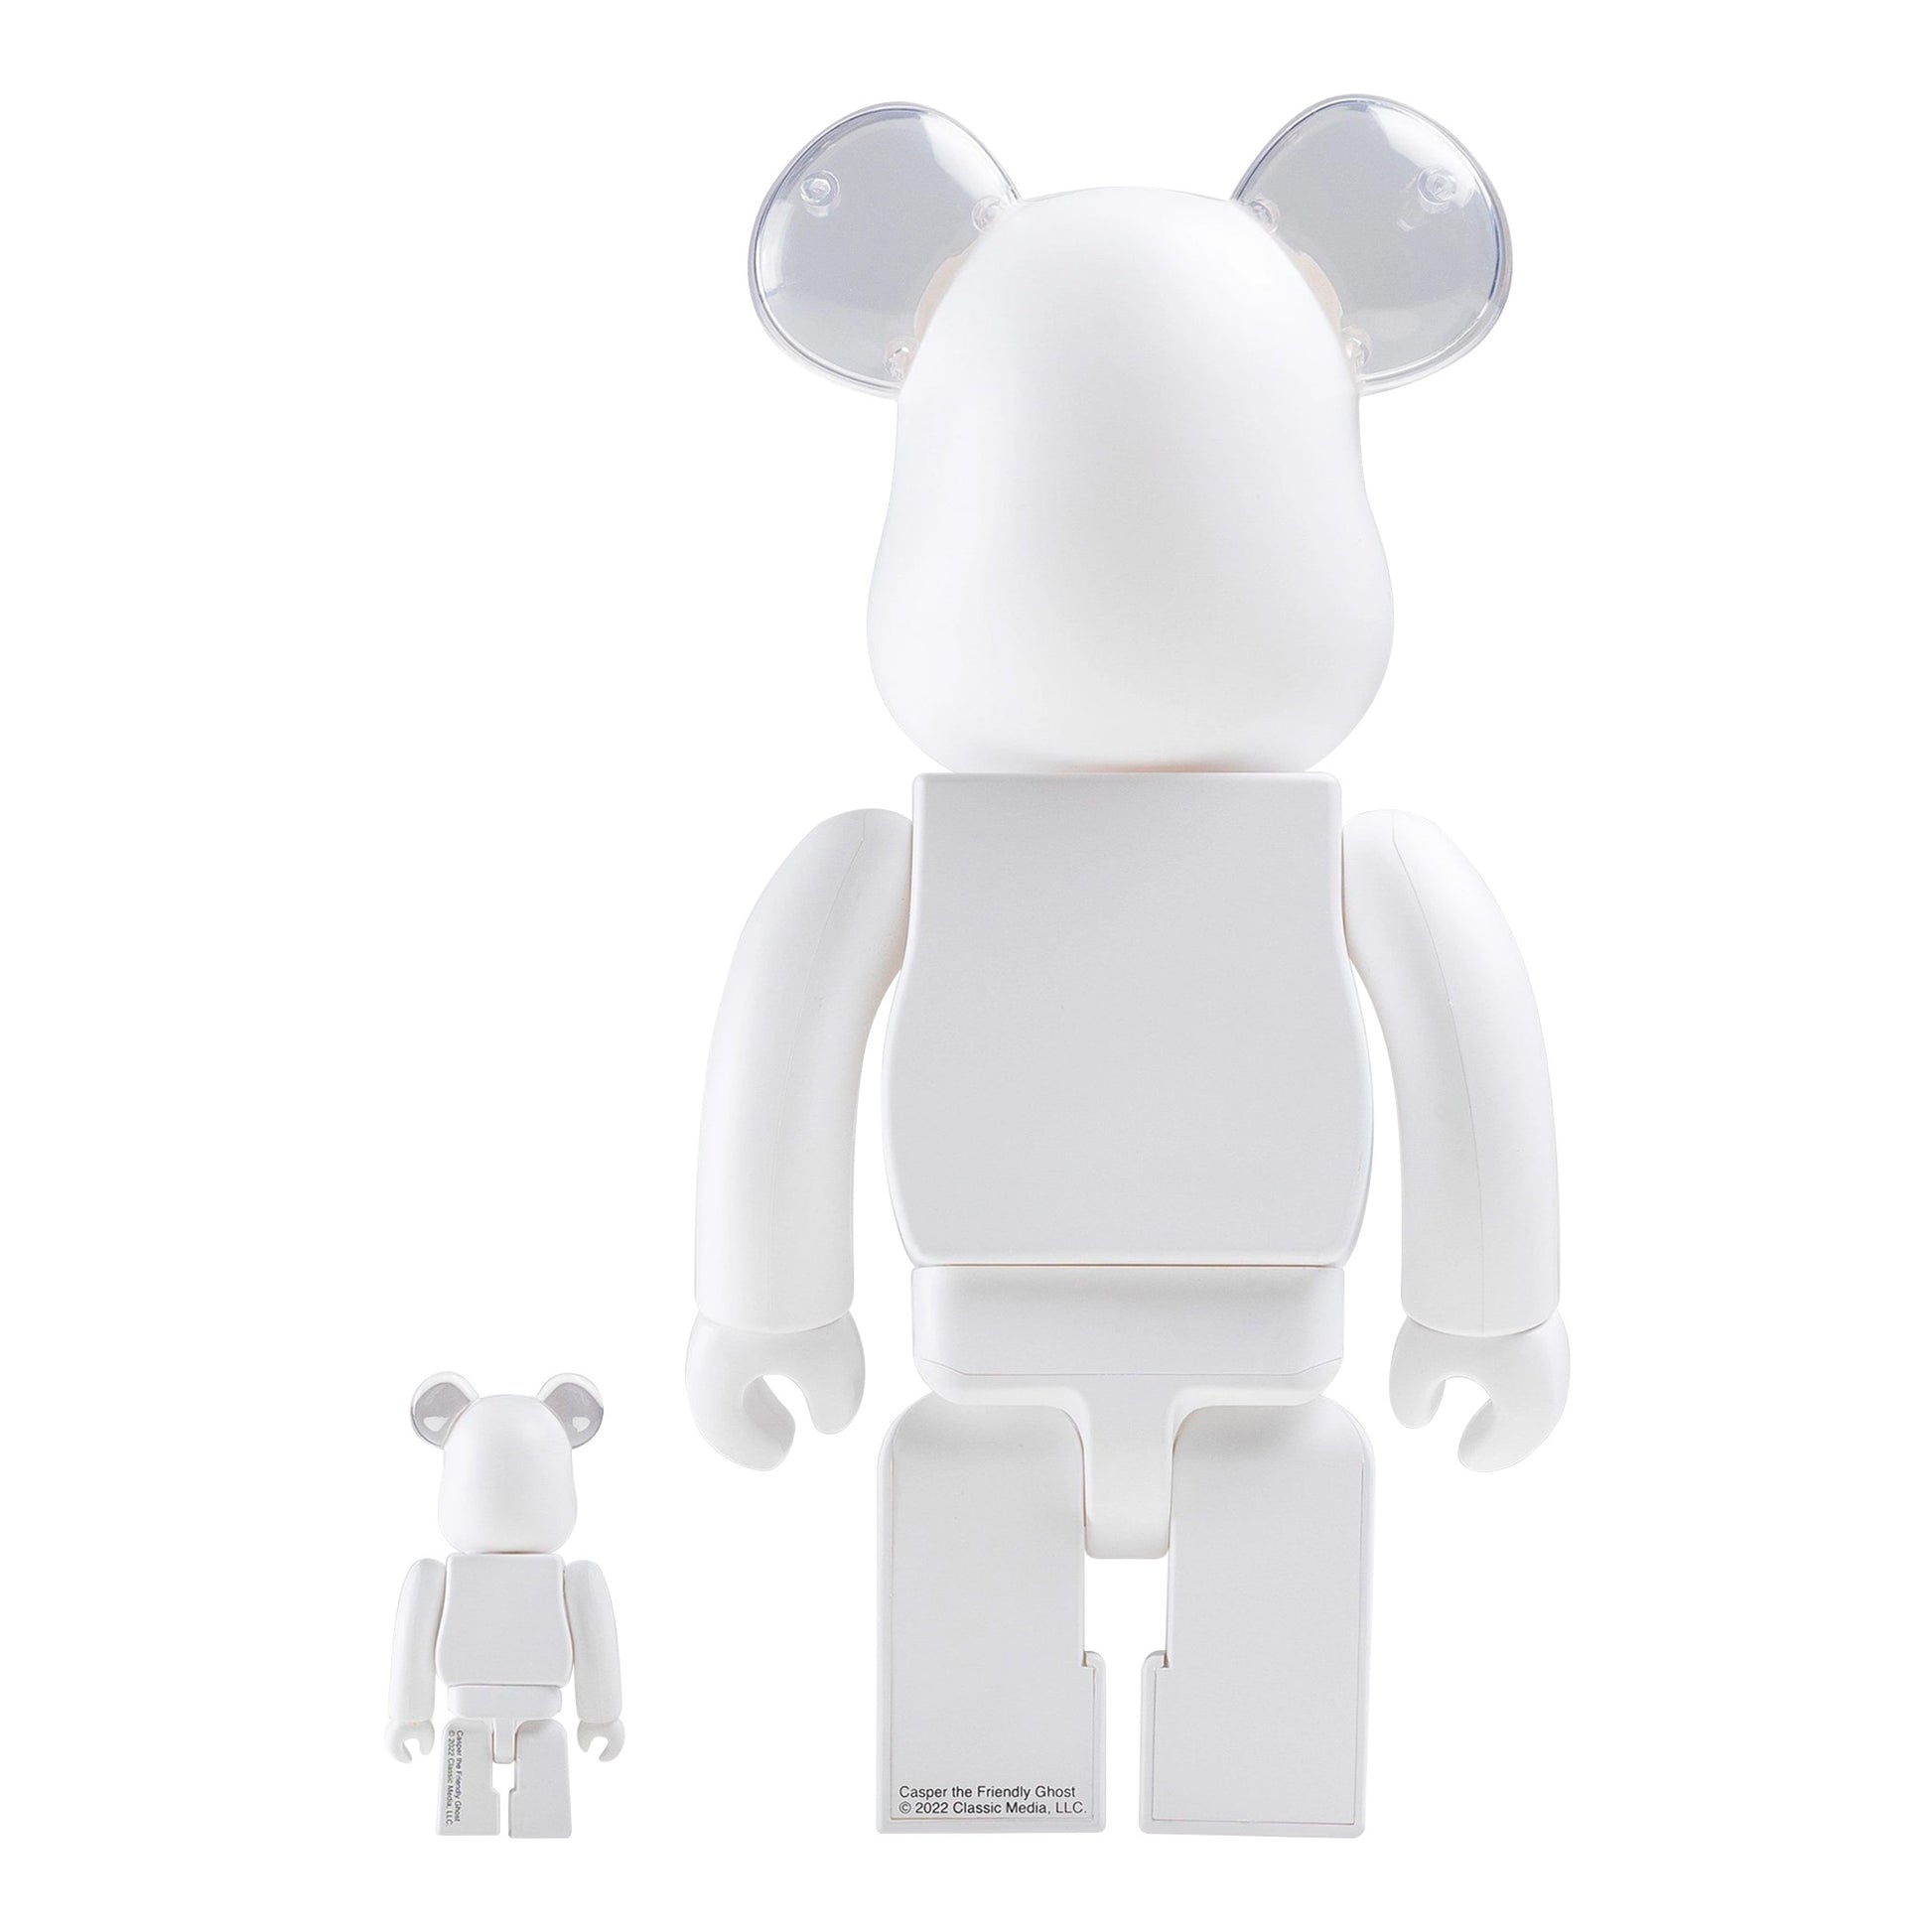 THE S MEDIA - ALL ABOUT BEARBRICK